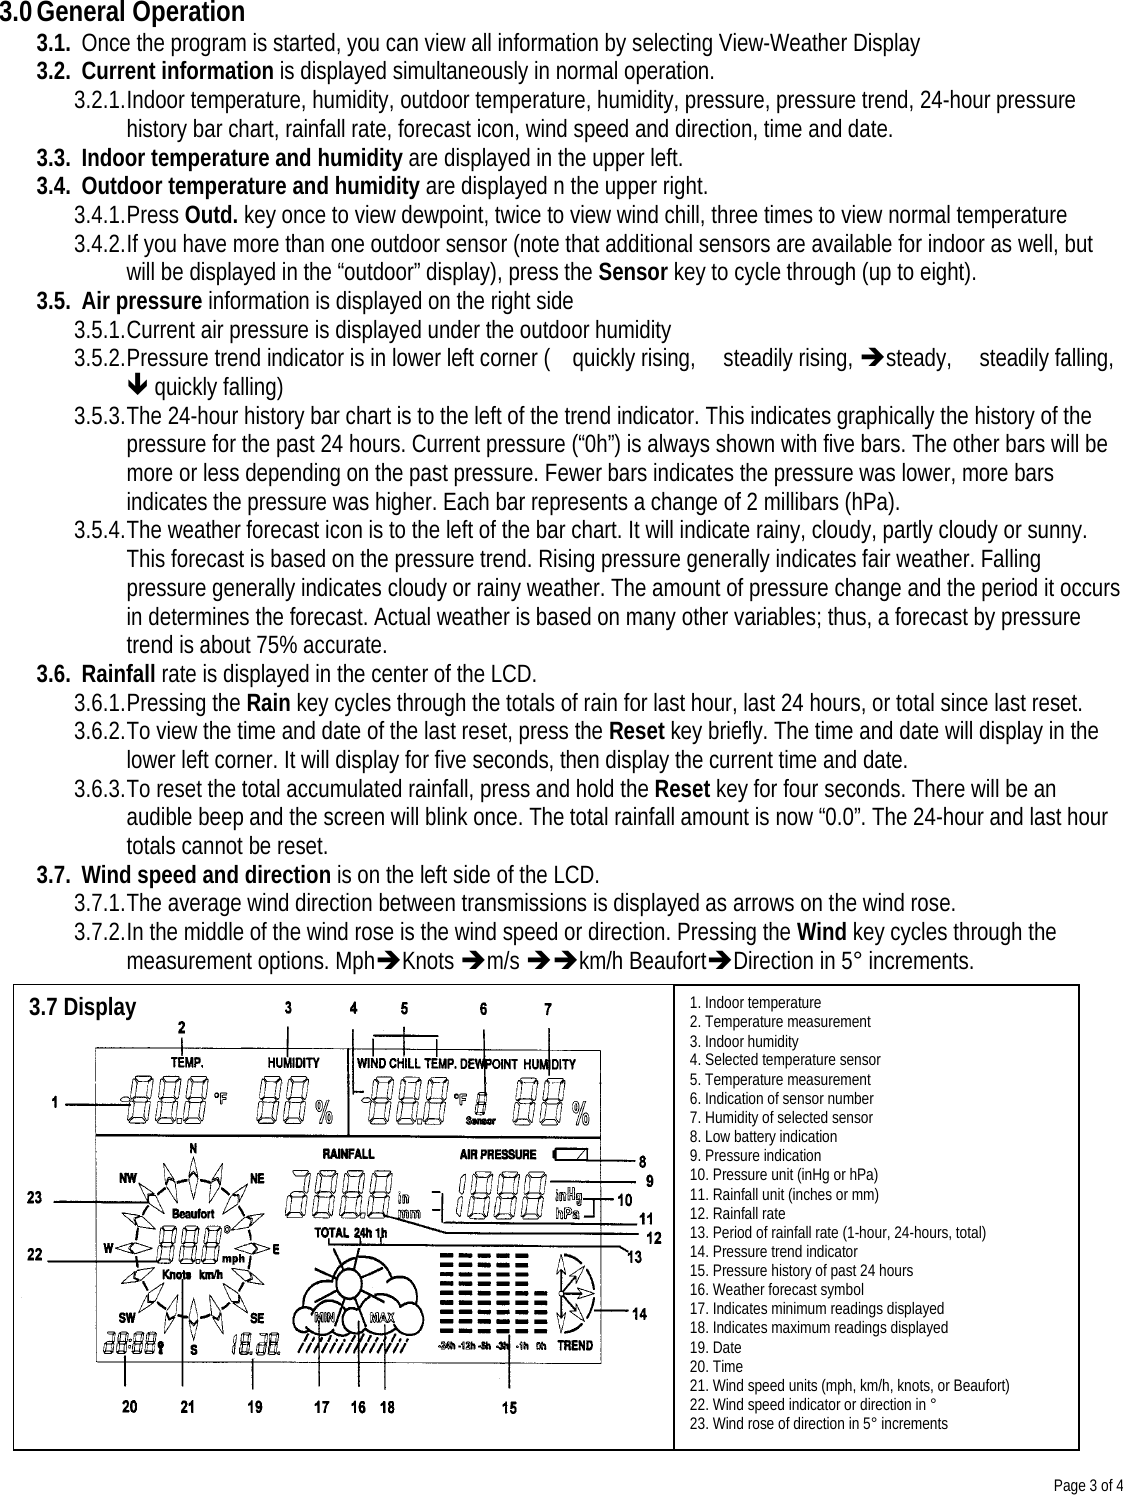 Page 3 of 41. Indoor temperature2. Temperature measurement3. Indoor humidity4. Selected temperature sensor5. Temperature measurement6. Indication of sensor number7. Humidity of selected sensor8. Low battery indication9. Pressure indication10. Pressure unit (inHg or hPa)11. Rainfall unit (inches or mm)12. Rainfall rate13. Period of rainfall rate (1-hour, 24-hours, total)14. Pressure trend indicator15. Pressure history of past 24 hours16. Weather forecast symbol17. Indicates minimum readings displayed18. Indicates maximum readings displayed19. Date20. Time21. Wind speed units (mph, km/h, knots, or Beaufort)22. Wind speed indicator or direction in °23. Wind rose of direction in 5° increments3.0 General Operation3.1. Once the program is started, you can view all information by selecting View-Weather Display3.2. Current information is displayed simultaneously in normal operation.3.2.1. Indoor temperature, humidity, outdoor temperature, humidity, pressure, pressure trend, 24-hour pressurehistory bar chart, rainfall rate, forecast icon, wind speed and direction, time and date.3.3. Indoor temperature and humidity are displayed in the upper left.3.4. Outdoor temperature and humidity are displayed n the upper right.3.4.1. Press Outd. key once to view dewpoint, twice to view wind chill, three times to view normal temperature3.4.2. If you have more than one outdoor sensor (note that additional sensors are available for indoor as well, butwill be displayed in the “outdoor” display), press the Sensor key to cycle through (up to eight).3.5. Air pressure information is displayed on the right side3.5.1. Current air pressure is displayed under the outdoor humidity3.5.2. Pressure trend indicator is in lower left corner ( quickly rising,  steadily rising, èsteady, steadily falling,ê quickly falling)3.5.3. The 24-hour history bar chart is to the left of the trend indicator. This indicates graphically the history of thepressure for the past 24 hours. Current pressure (“0h”) is always shown with five bars. The other bars will bemore or less depending on the past pressure. Fewer bars indicates the pressure was lower, more barsindicates the pressure was higher. Each bar represents a change of 2 millibars (hPa).3.5.4. The weather forecast icon is to the left of the bar chart. It will indicate rainy, cloudy, partly cloudy or sunny.This forecast is based on the pressure trend. Rising pressure generally indicates fair weather. Fallingpressure generally indicates cloudy or rainy weather. The amount of pressure change and the period it occursin determines the forecast. Actual weather is based on many other variables; thus, a forecast by pressuretrend is about 75% accurate.3.6. Rainfall rate is displayed in the center of the LCD.3.6.1. Pressing the Rain key cycles through the totals of rain for last hour, last 24 hours, or total since last reset.3.6.2. To view the time and date of the last reset, press the Reset key briefly. The time and date will display in thelower left corner. It will display for five seconds, then display the current time and date.3.6.3. To reset the total accumulated rainfall, press and hold the Reset key for four seconds. There will be anaudible beep and the screen will blink once. The total rainfall amount is now “0.0”. The 24-hour and last hourtotals cannot be reset.3.7. Wind speed and direction is on the left side of the LCD.3.7.1. The average wind direction between transmissions is displayed as arrows on the wind rose.3.7.2. In the middle of the wind rose is the wind speed or direction. Pressing the Wind key cycles through themeasurement options. MphèKnots èm/s èèkm/h BeaufortèDirection in 5° increments.3.7 Display